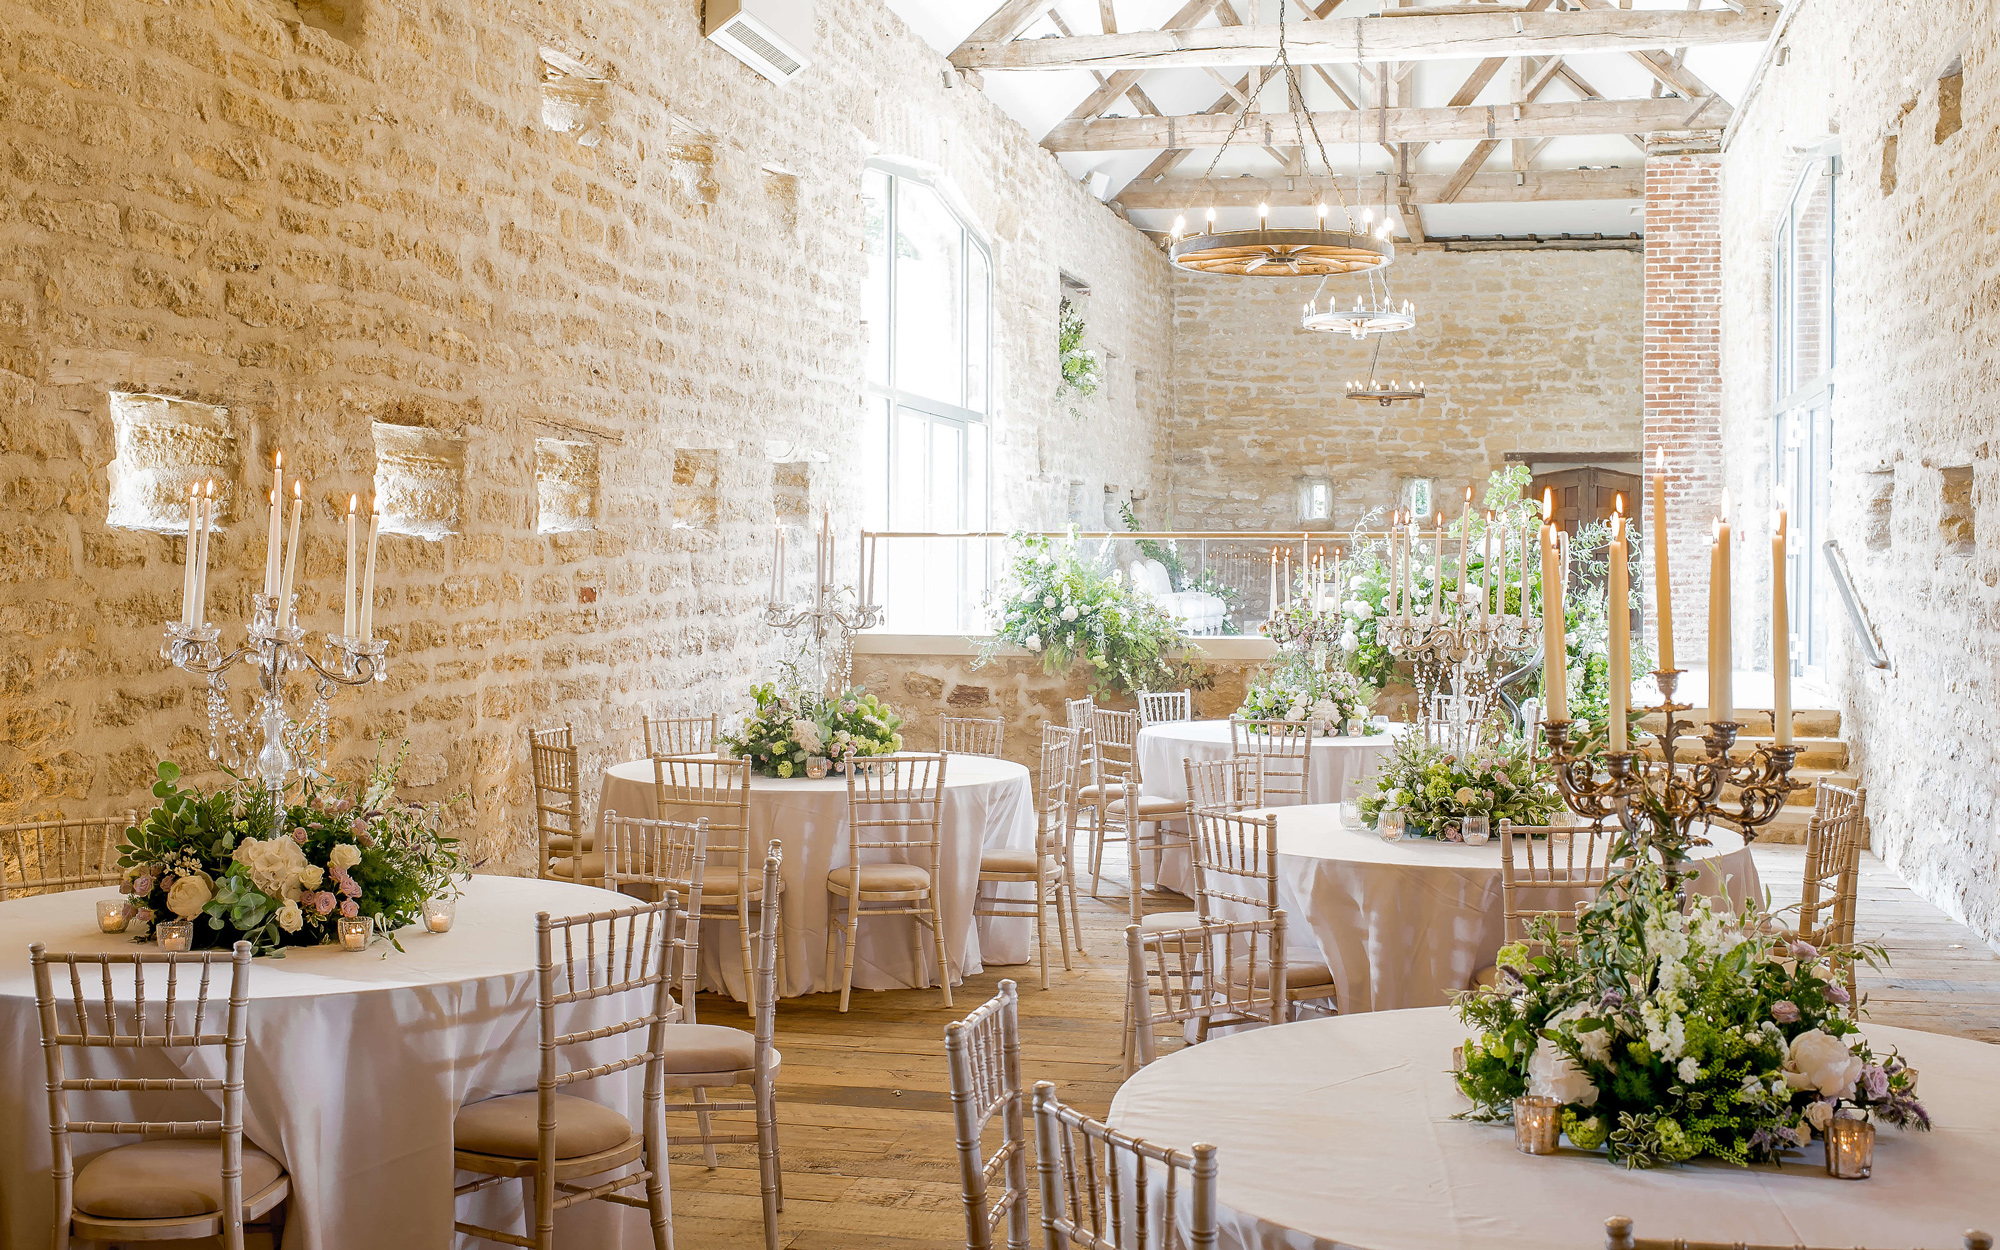 Barn Wedding Venues South Yorkshire - 33 Wedding Ideas You have Never